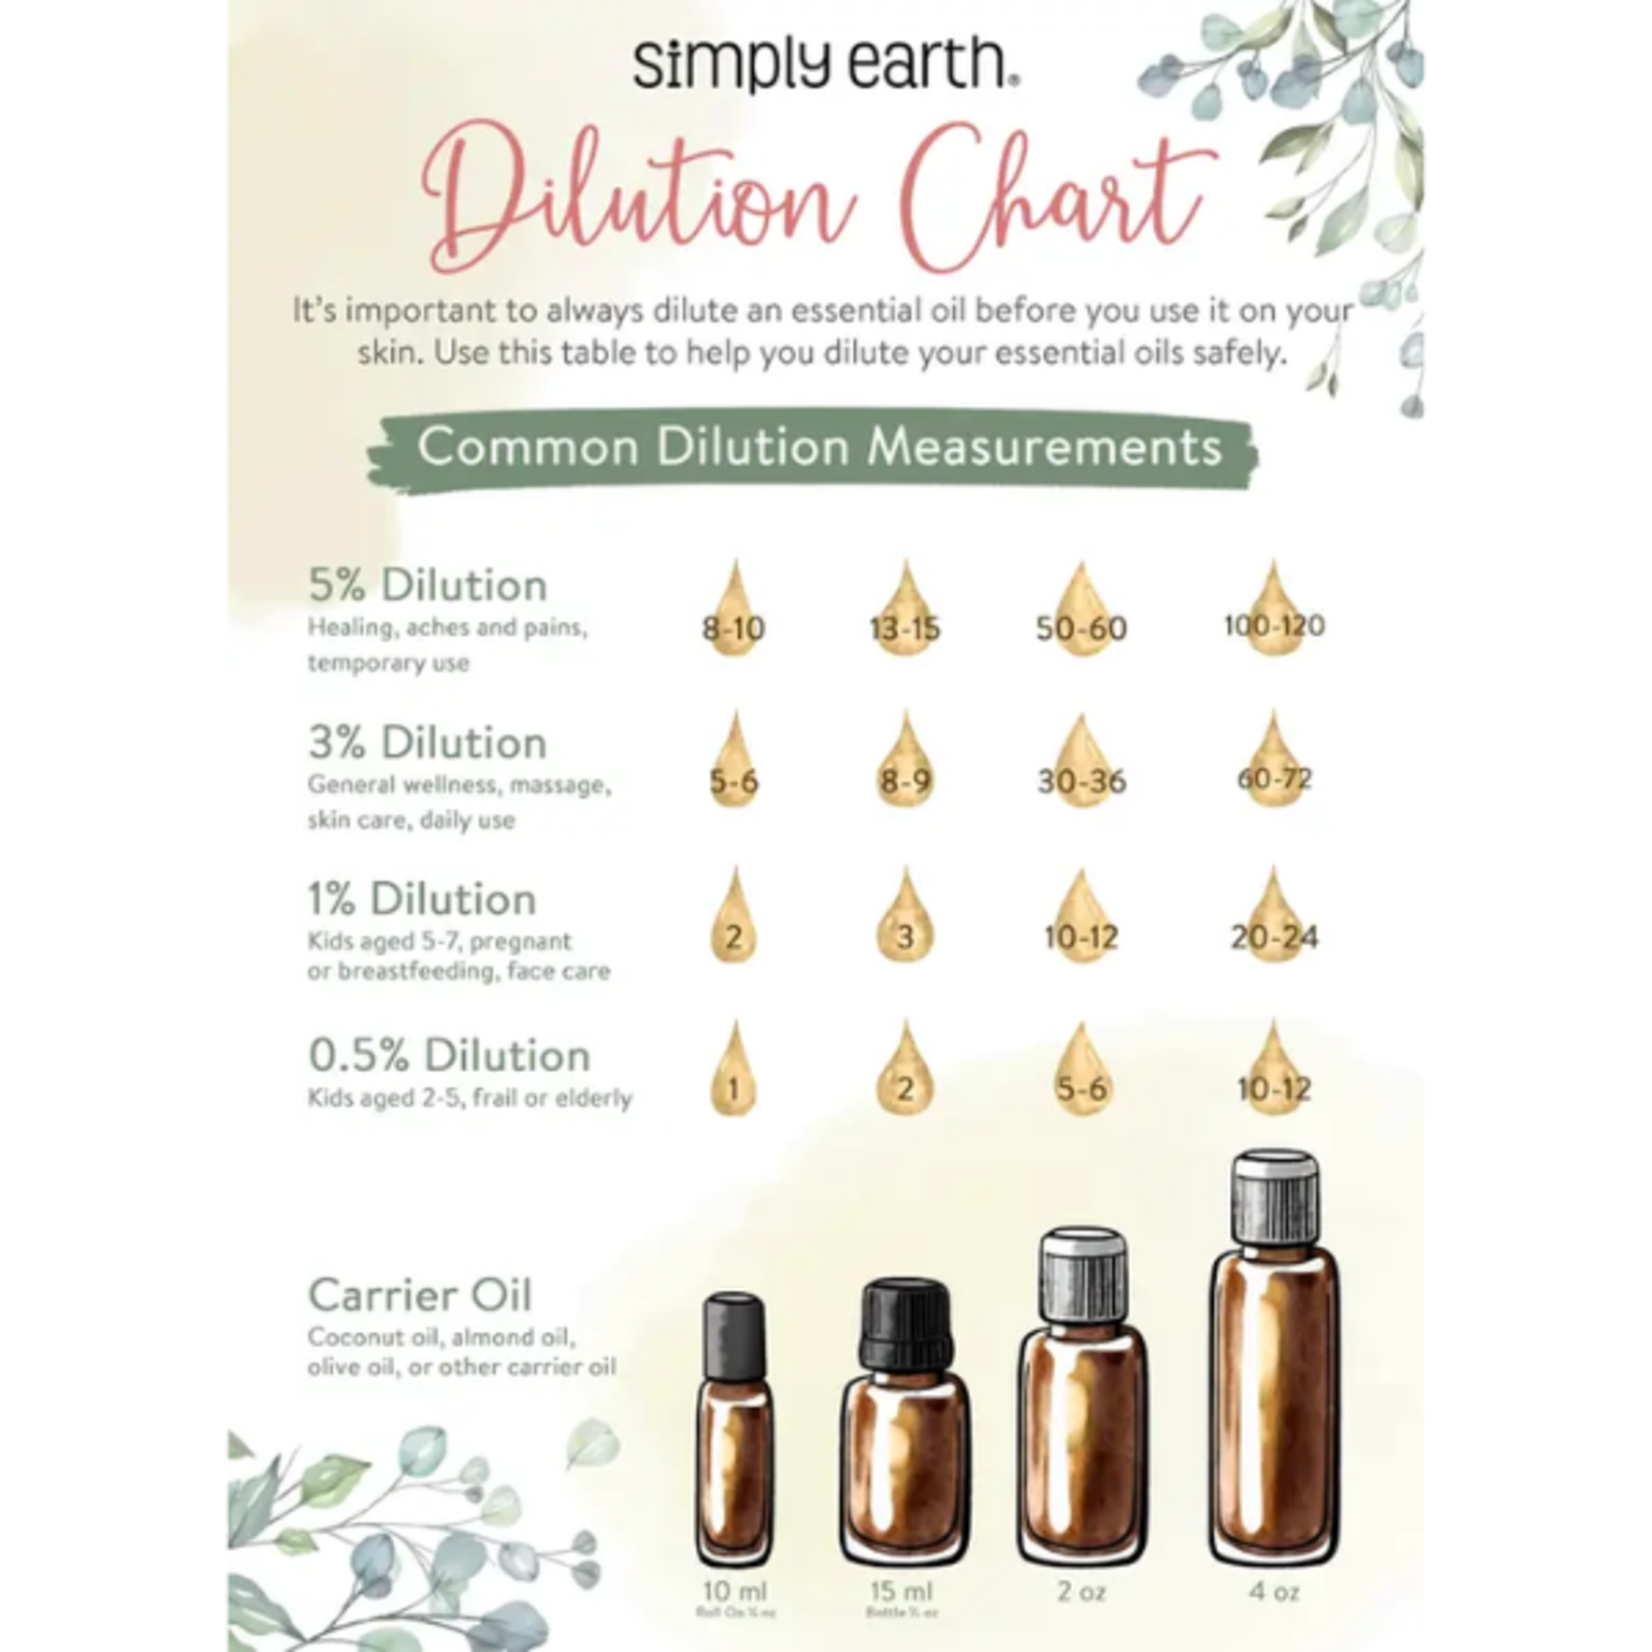 Simply Earth© Essential Oil Blend - Energy